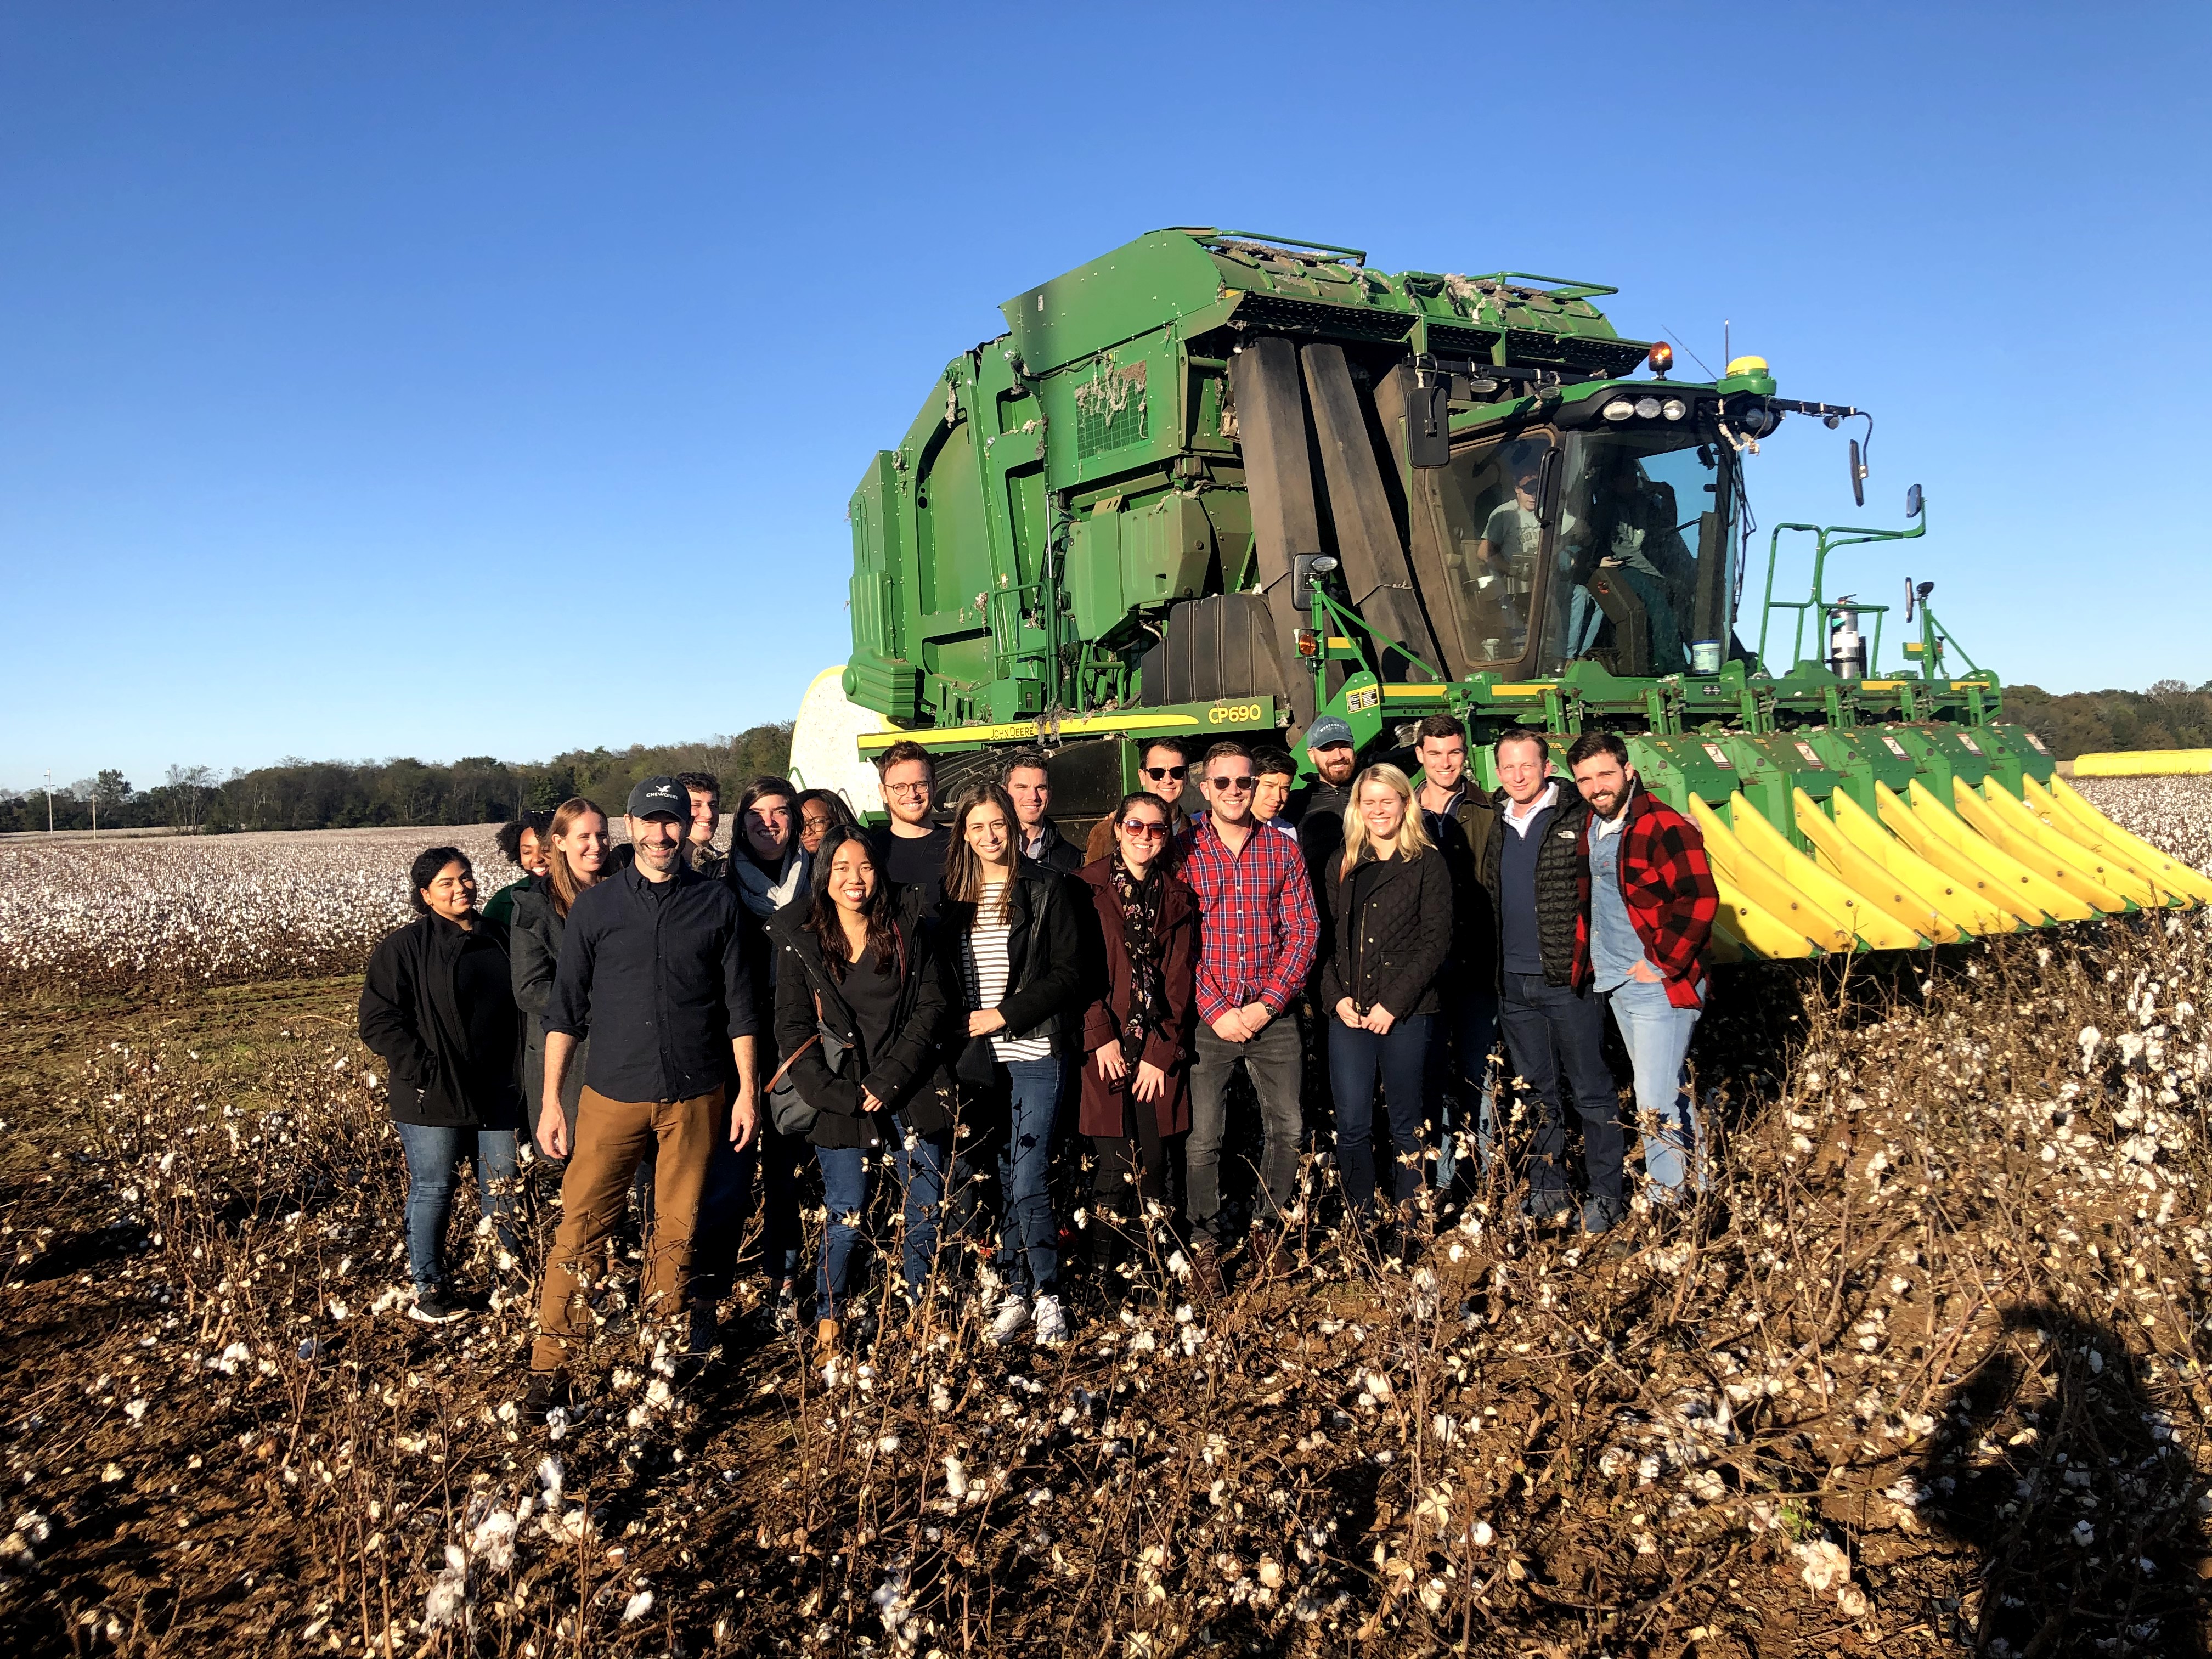 Group of students standing on farmland near a green tractor